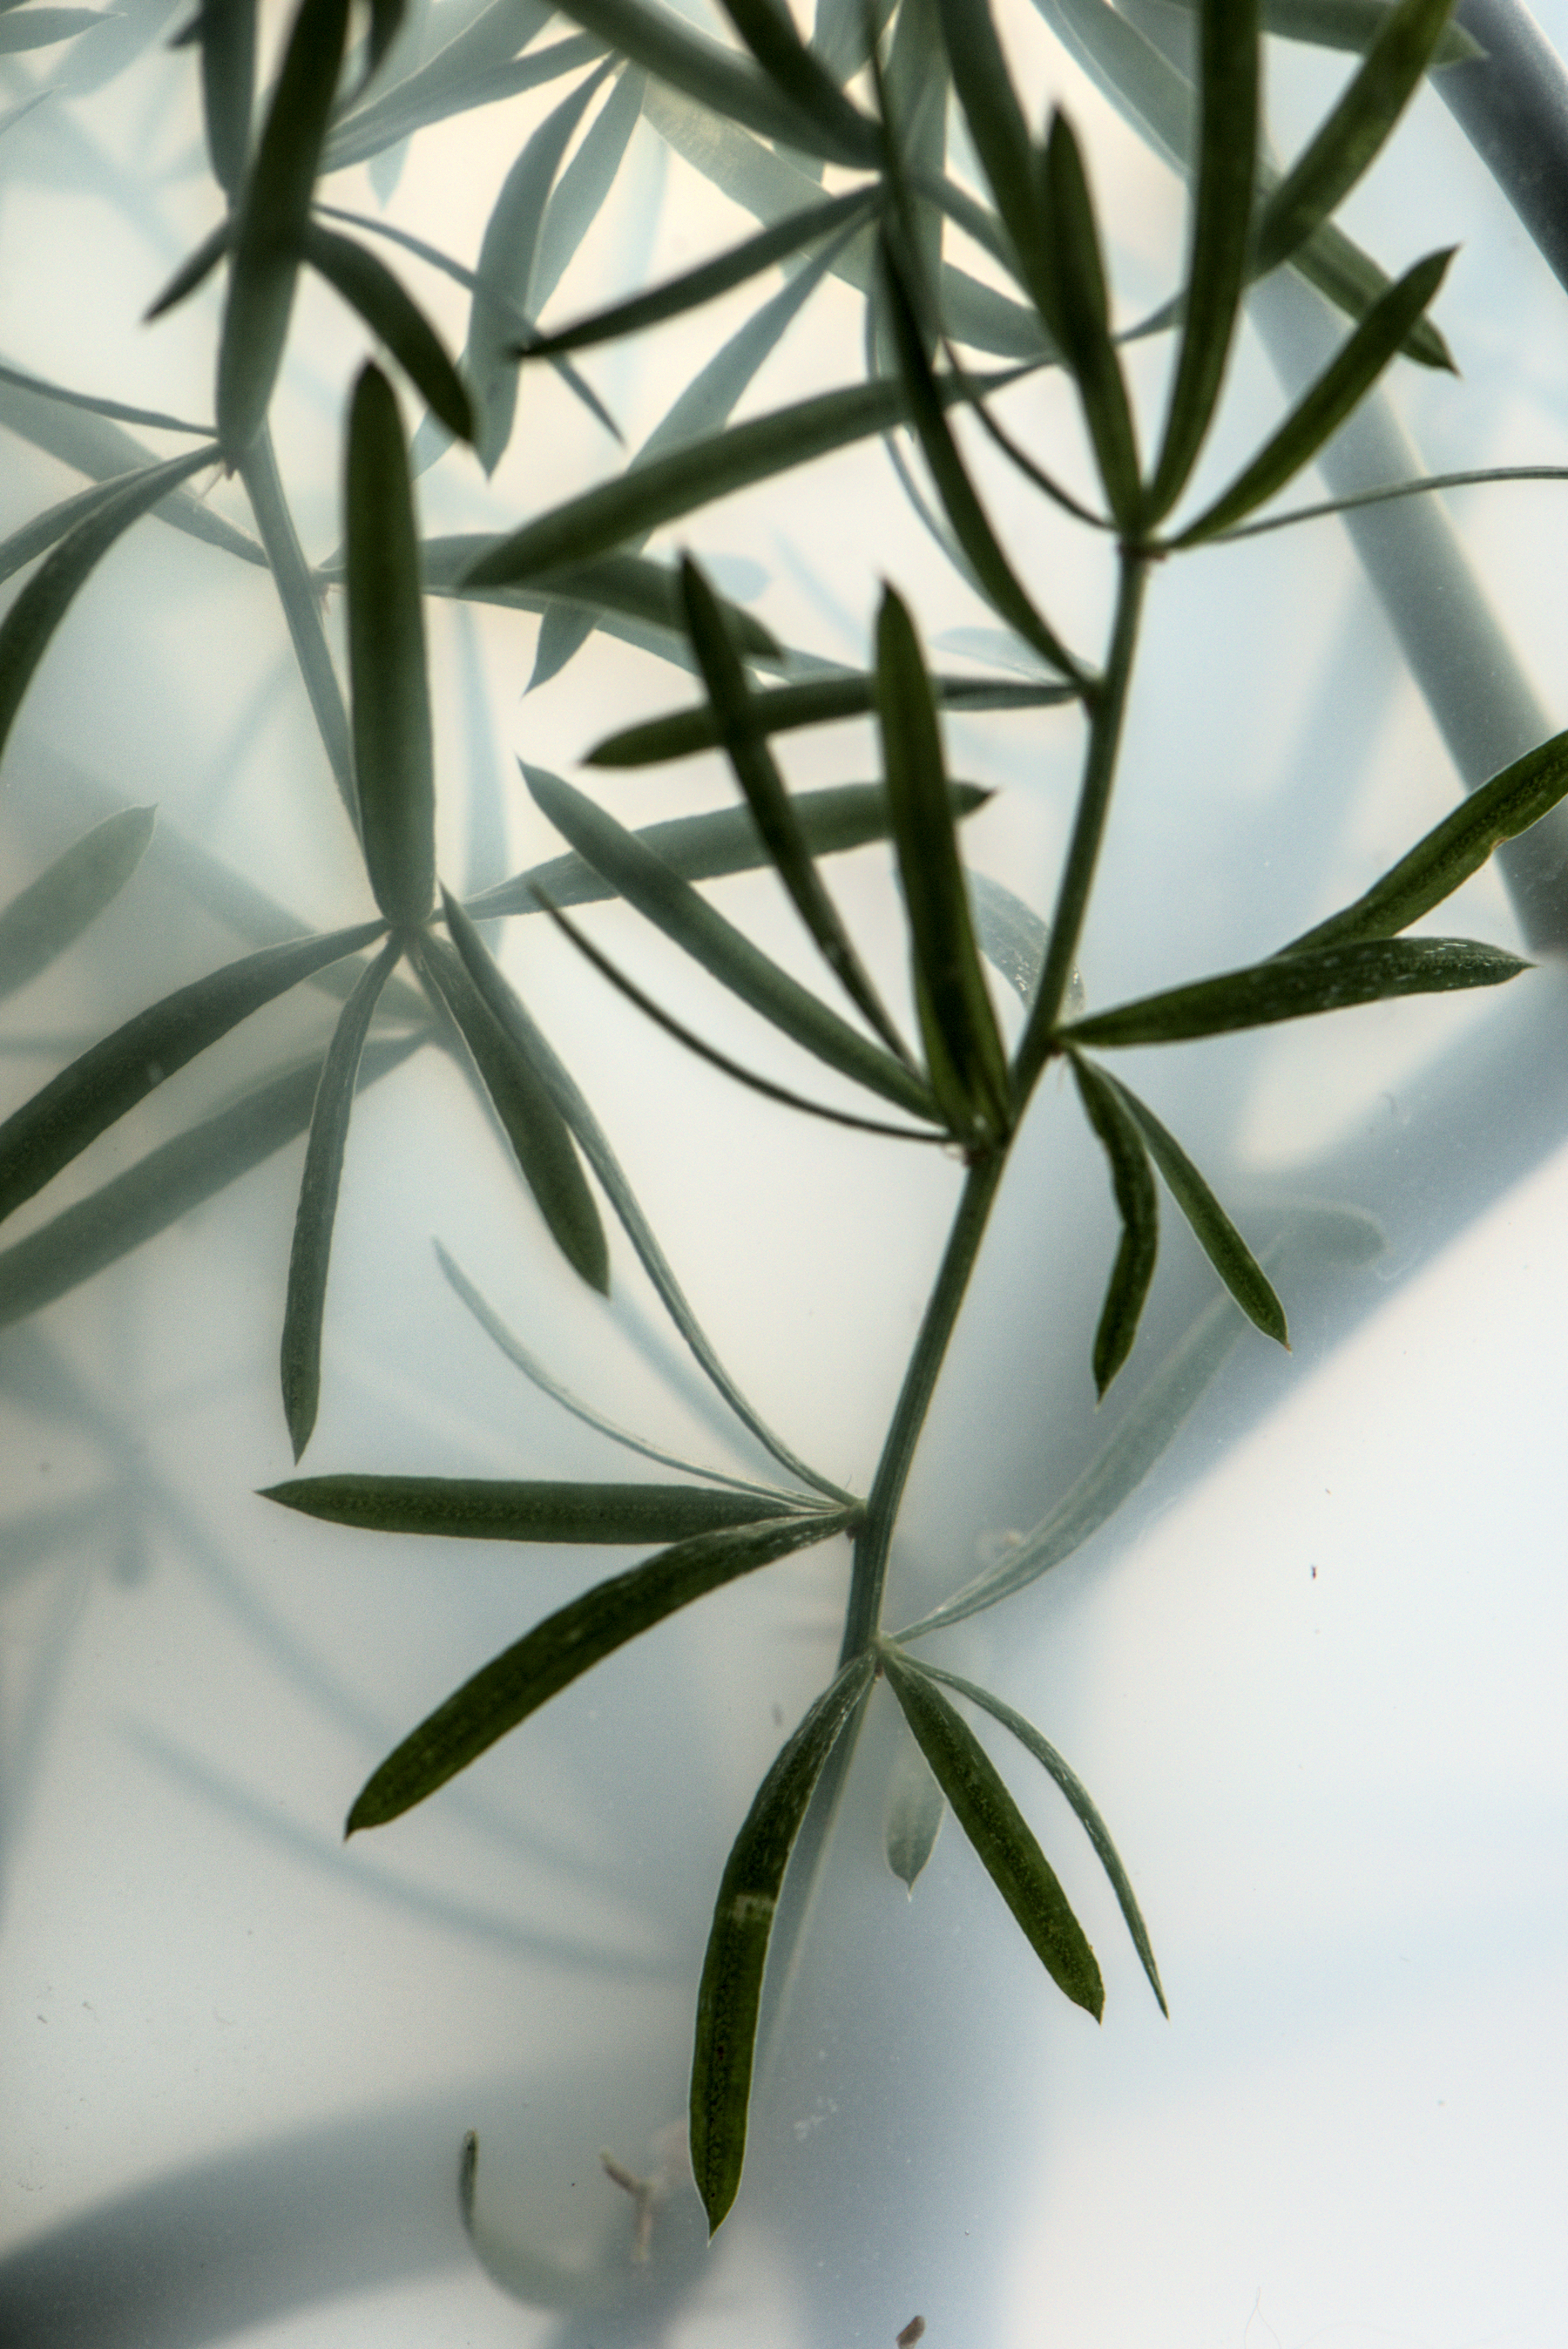 A plant with clusters of long, narrow leaves is seen in a milky, semi-transparent liquid.